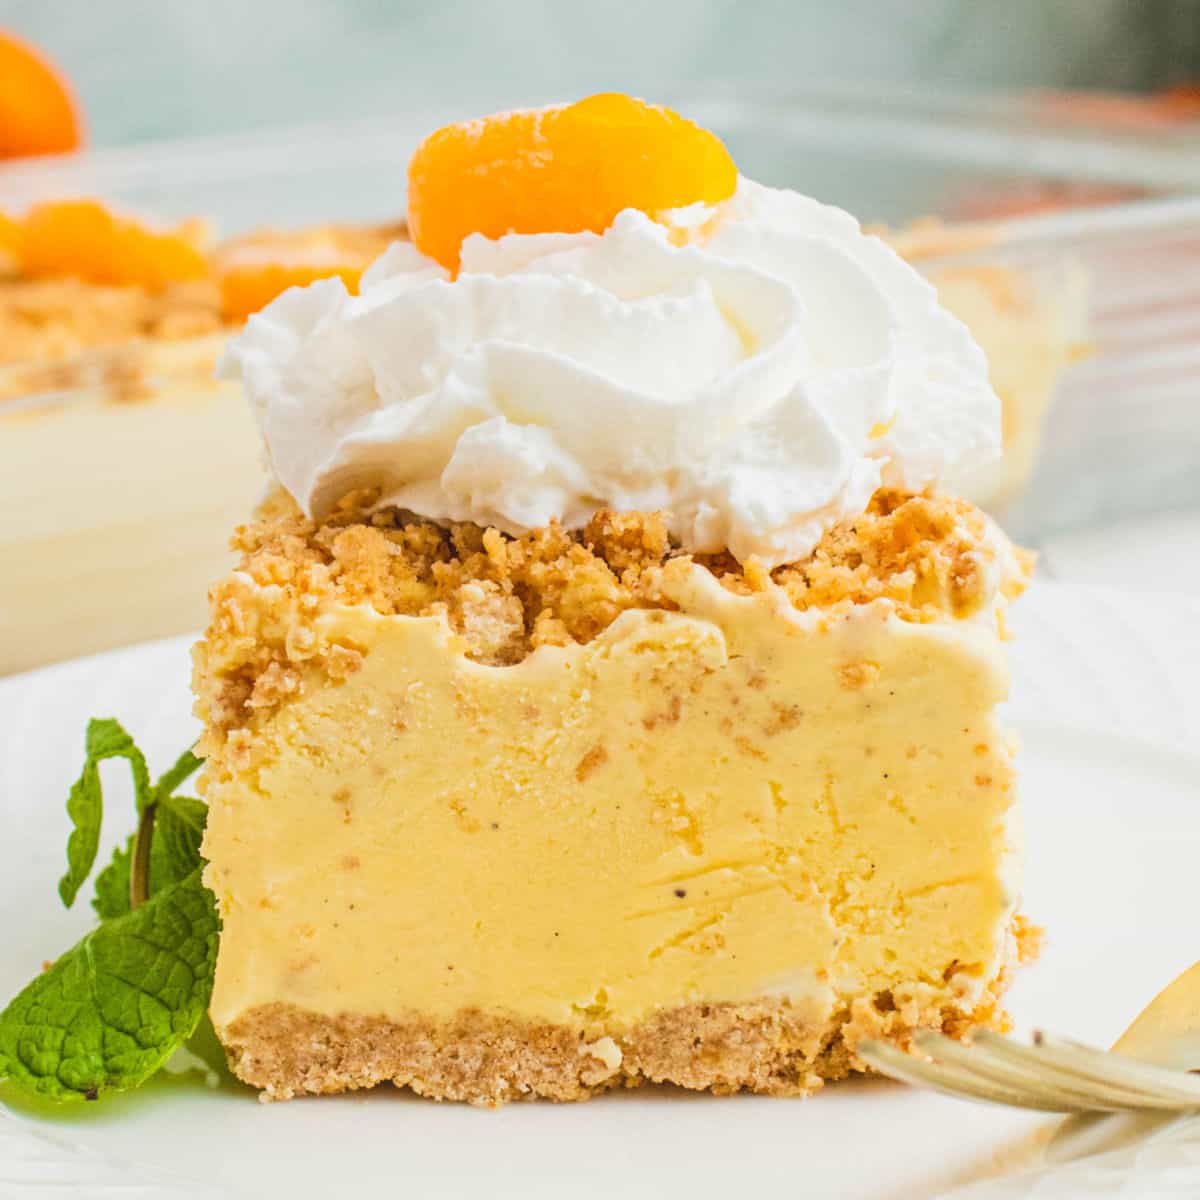 square image of a slice of orange creamsicle ice cream dessert topped with whipped cream and a mandarin orange